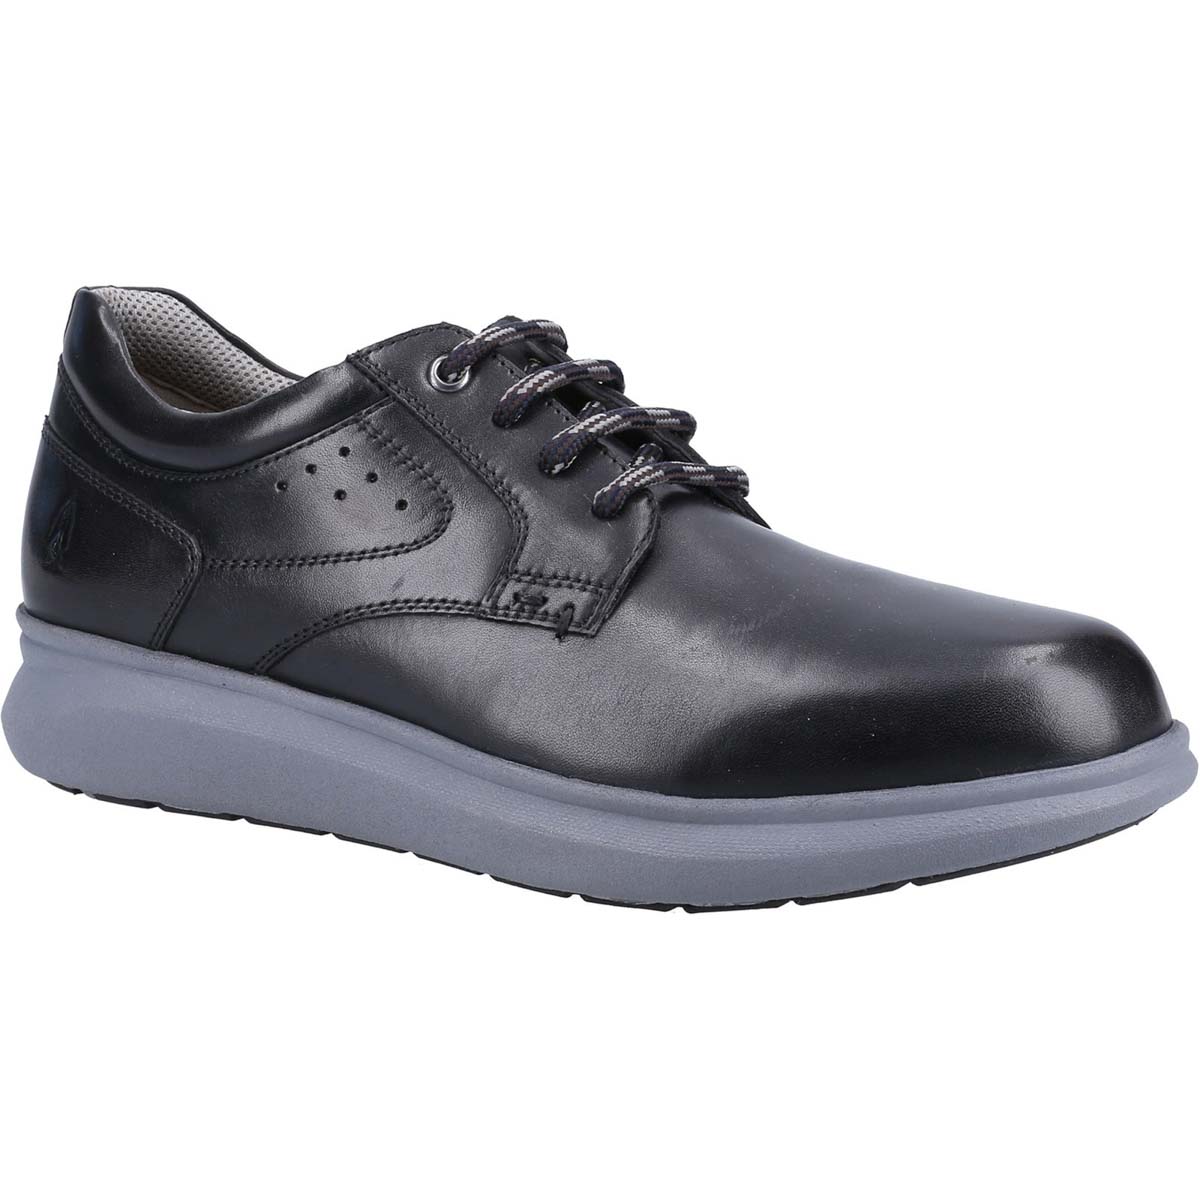 Hush Puppies Brett Black Mens fashion shoes 36668-68480 in a Plain Leather in Size 9